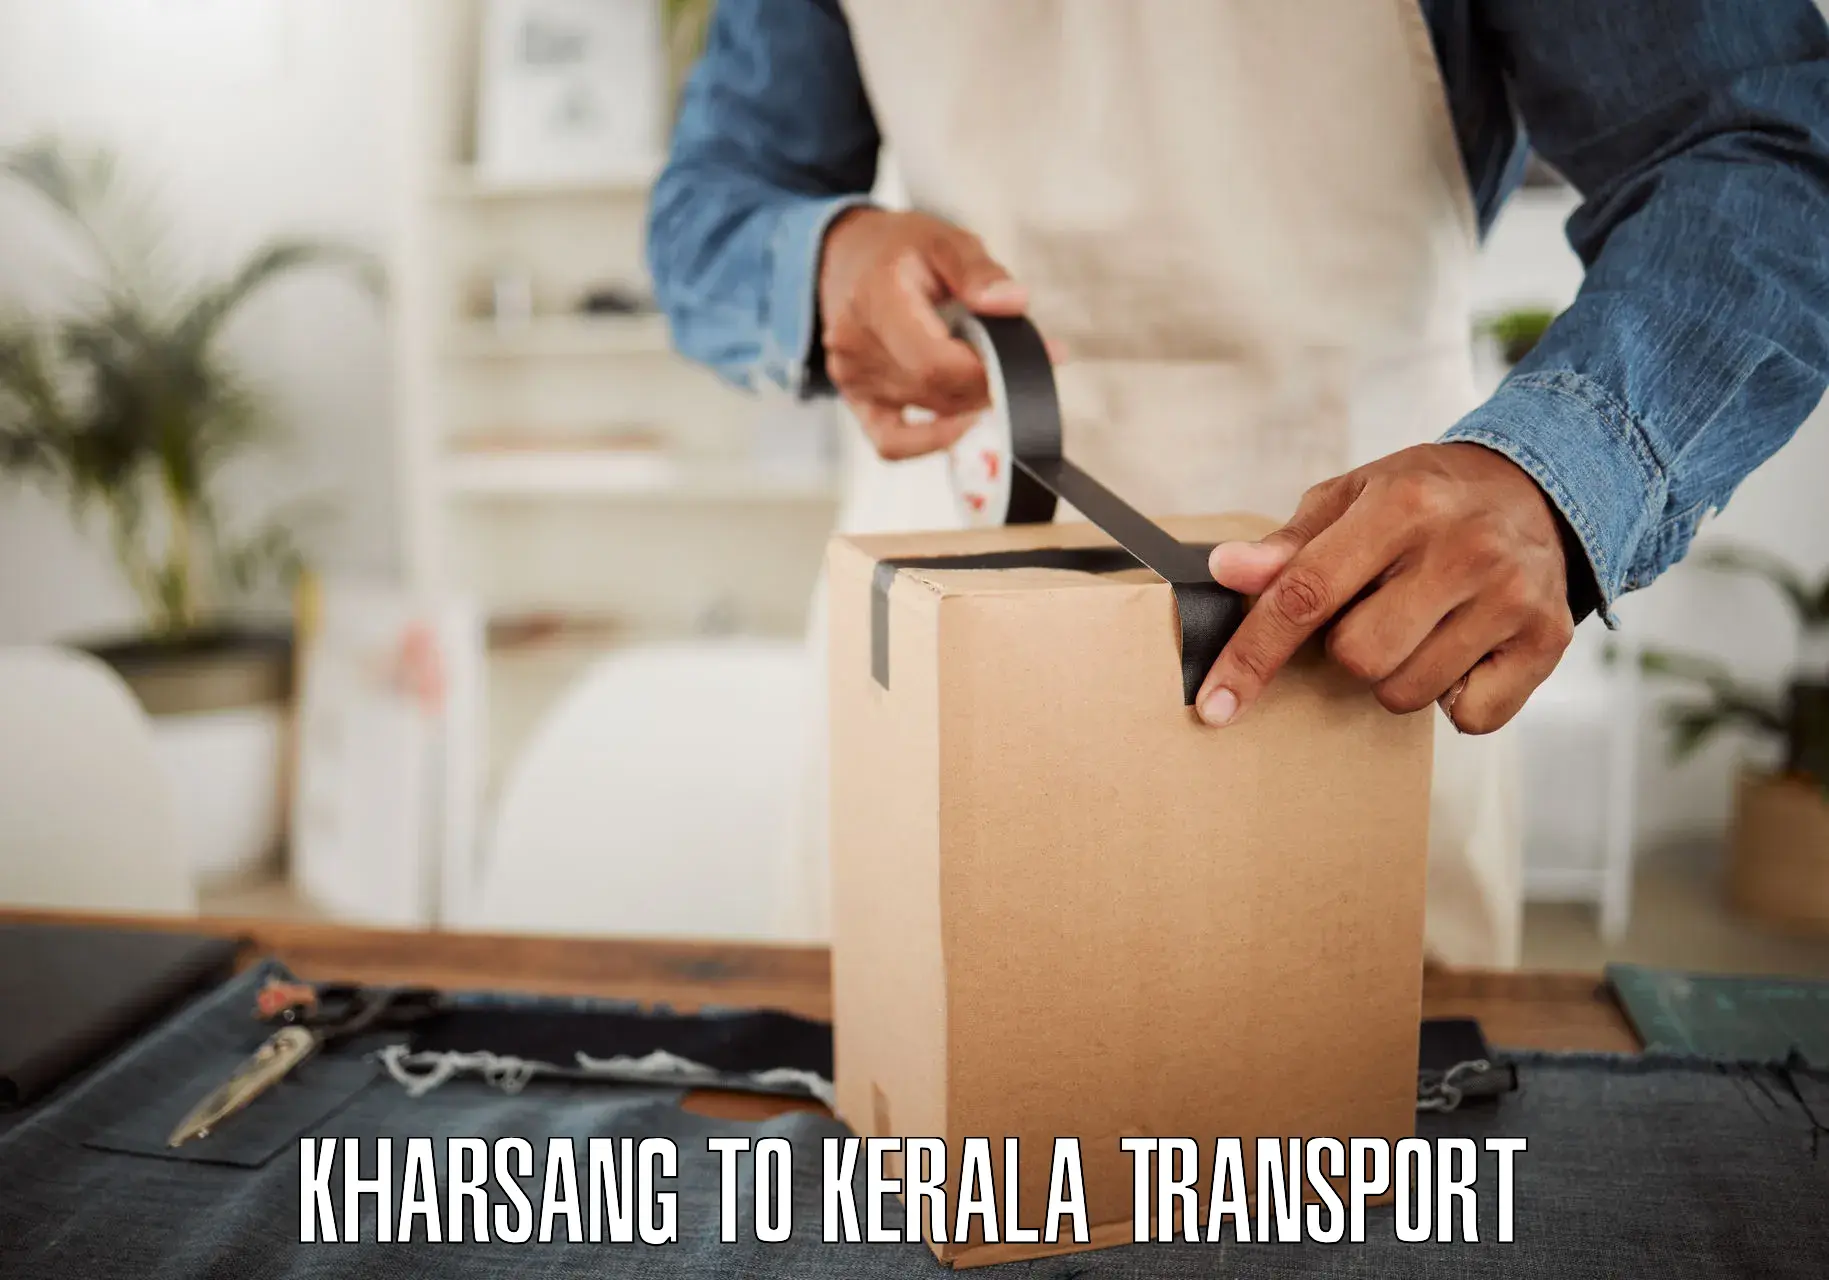 Truck transport companies in India Kharsang to Thrissur